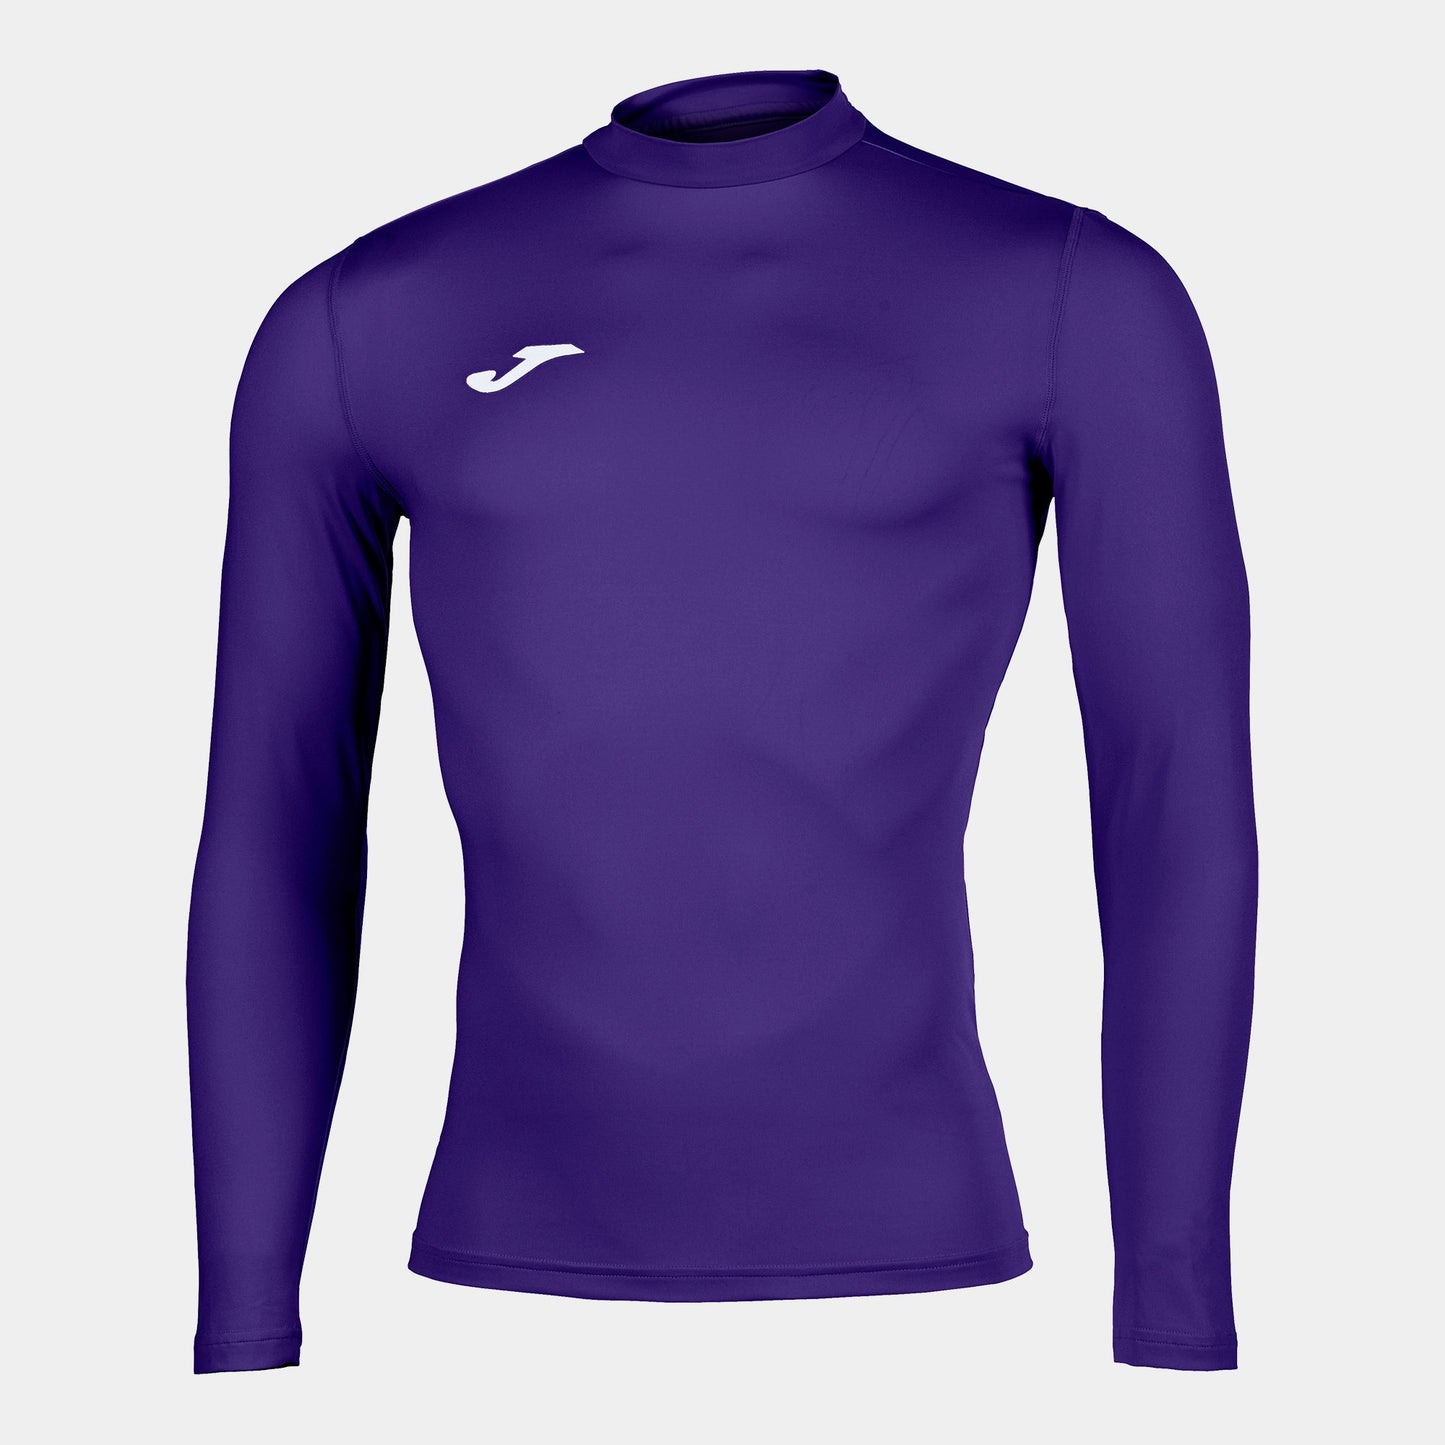 Joma Brama Baselayer Long Sleeve, available in Joma Canada Store. Joma is shipping in Canada. For club offers contact us.